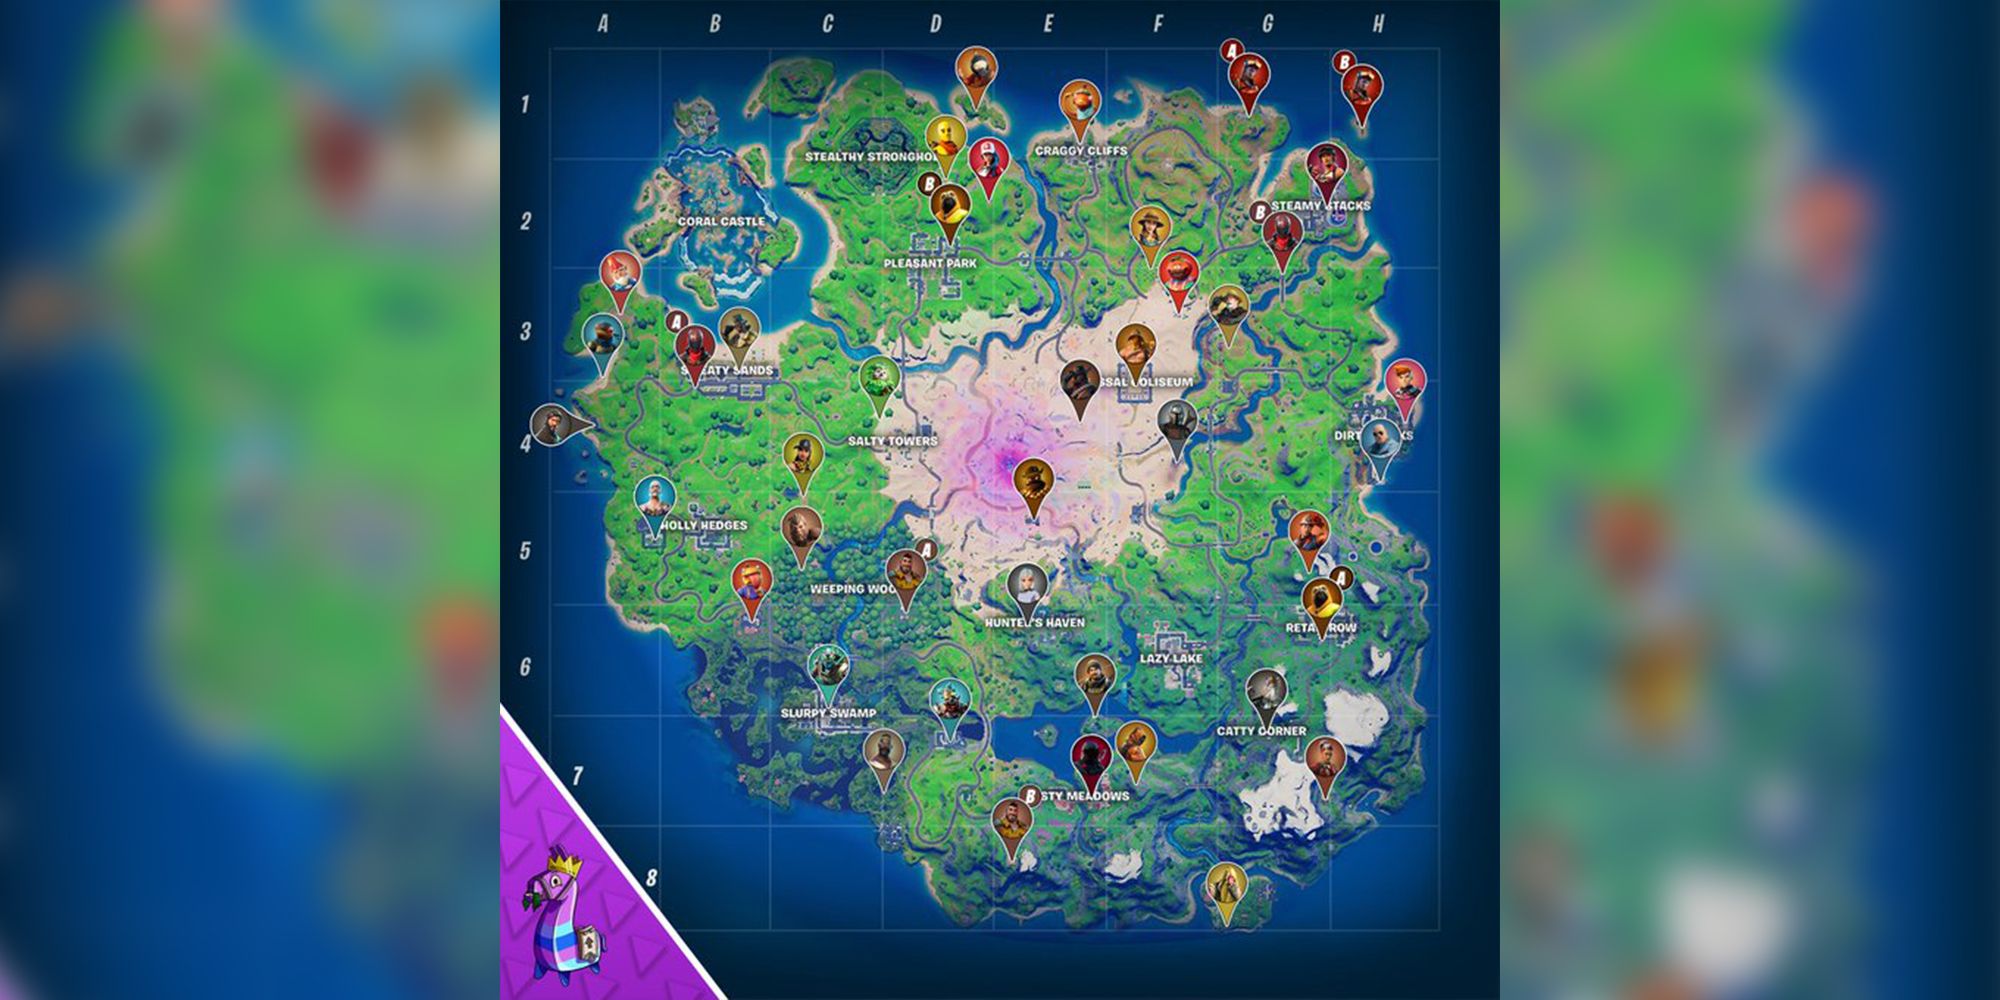 Where to Find NPC QuestGivers in Fortnite (Season 5)Fortnite features